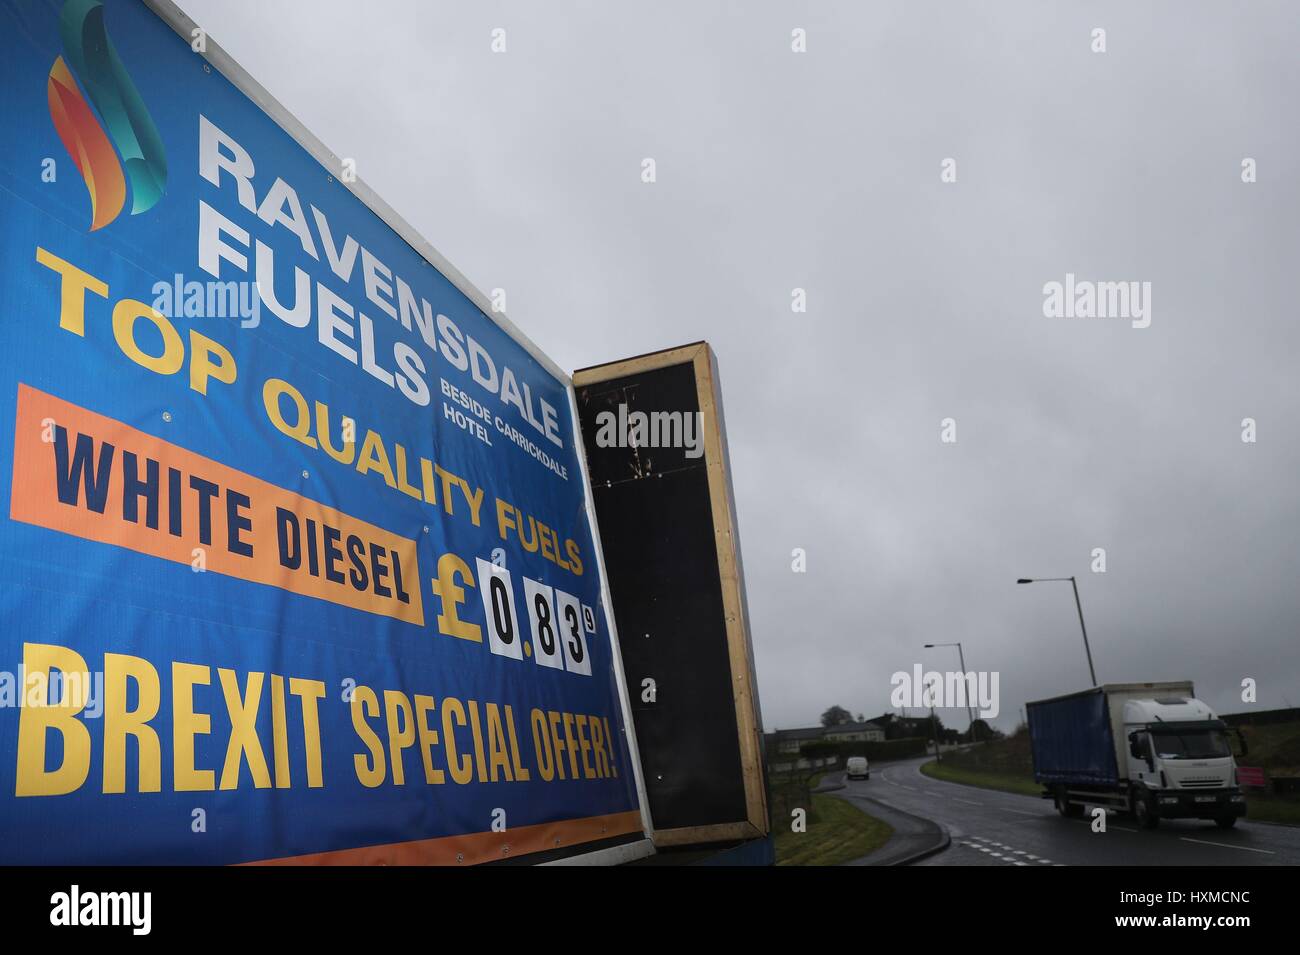 A fuel company offers a 'Brexit Special Offer' at the border between the Republic of Ireland and Northern Ireland near the village of Killeen, as Prime Minister Theresa May triggers Article 50, starting the process that will see Britain leave the EU. Stock Photo